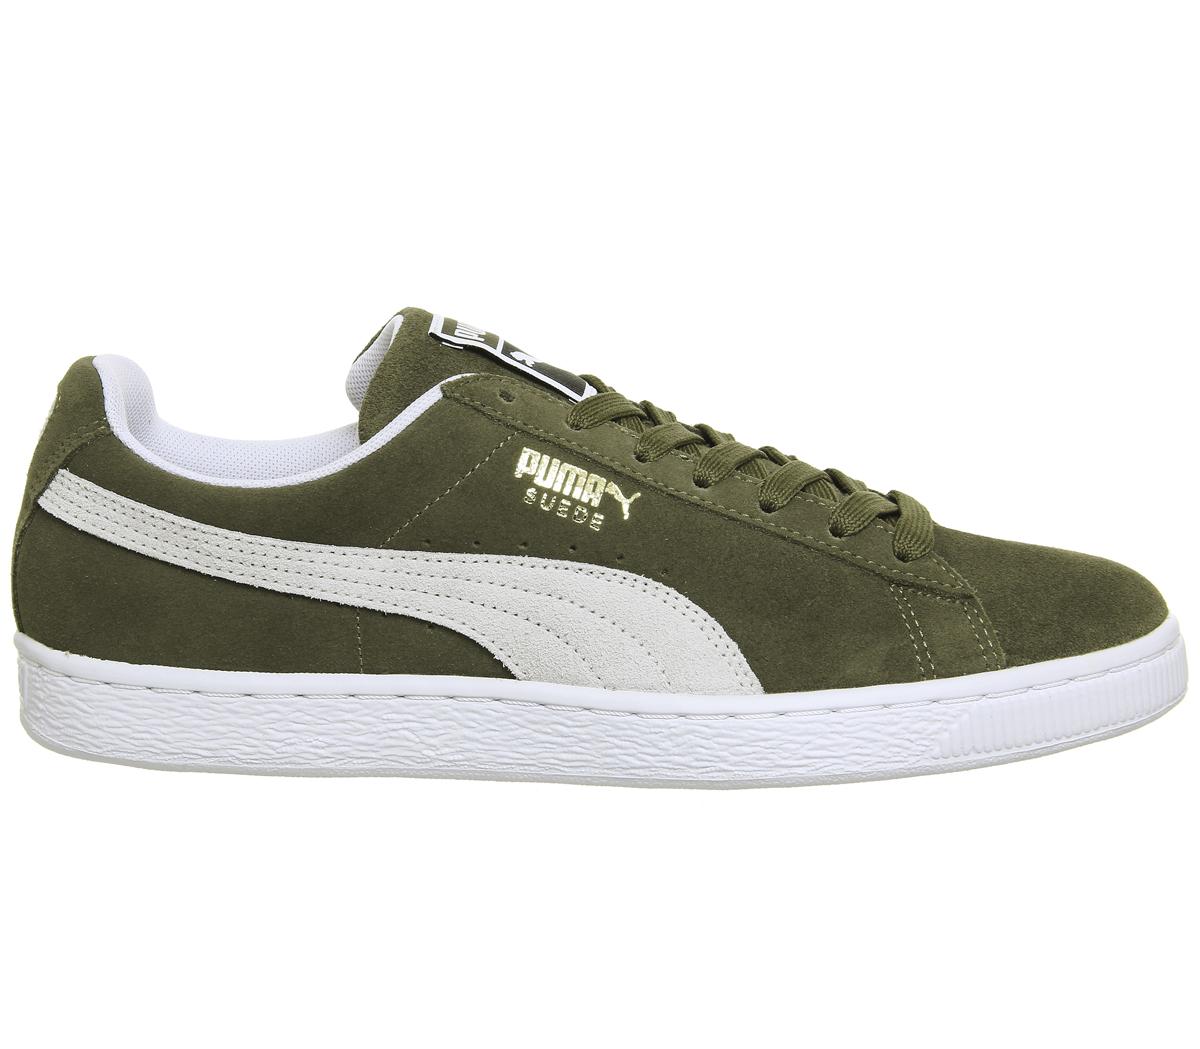 PUMA Suede Classic Trainers in Olive (Green) - Lyst